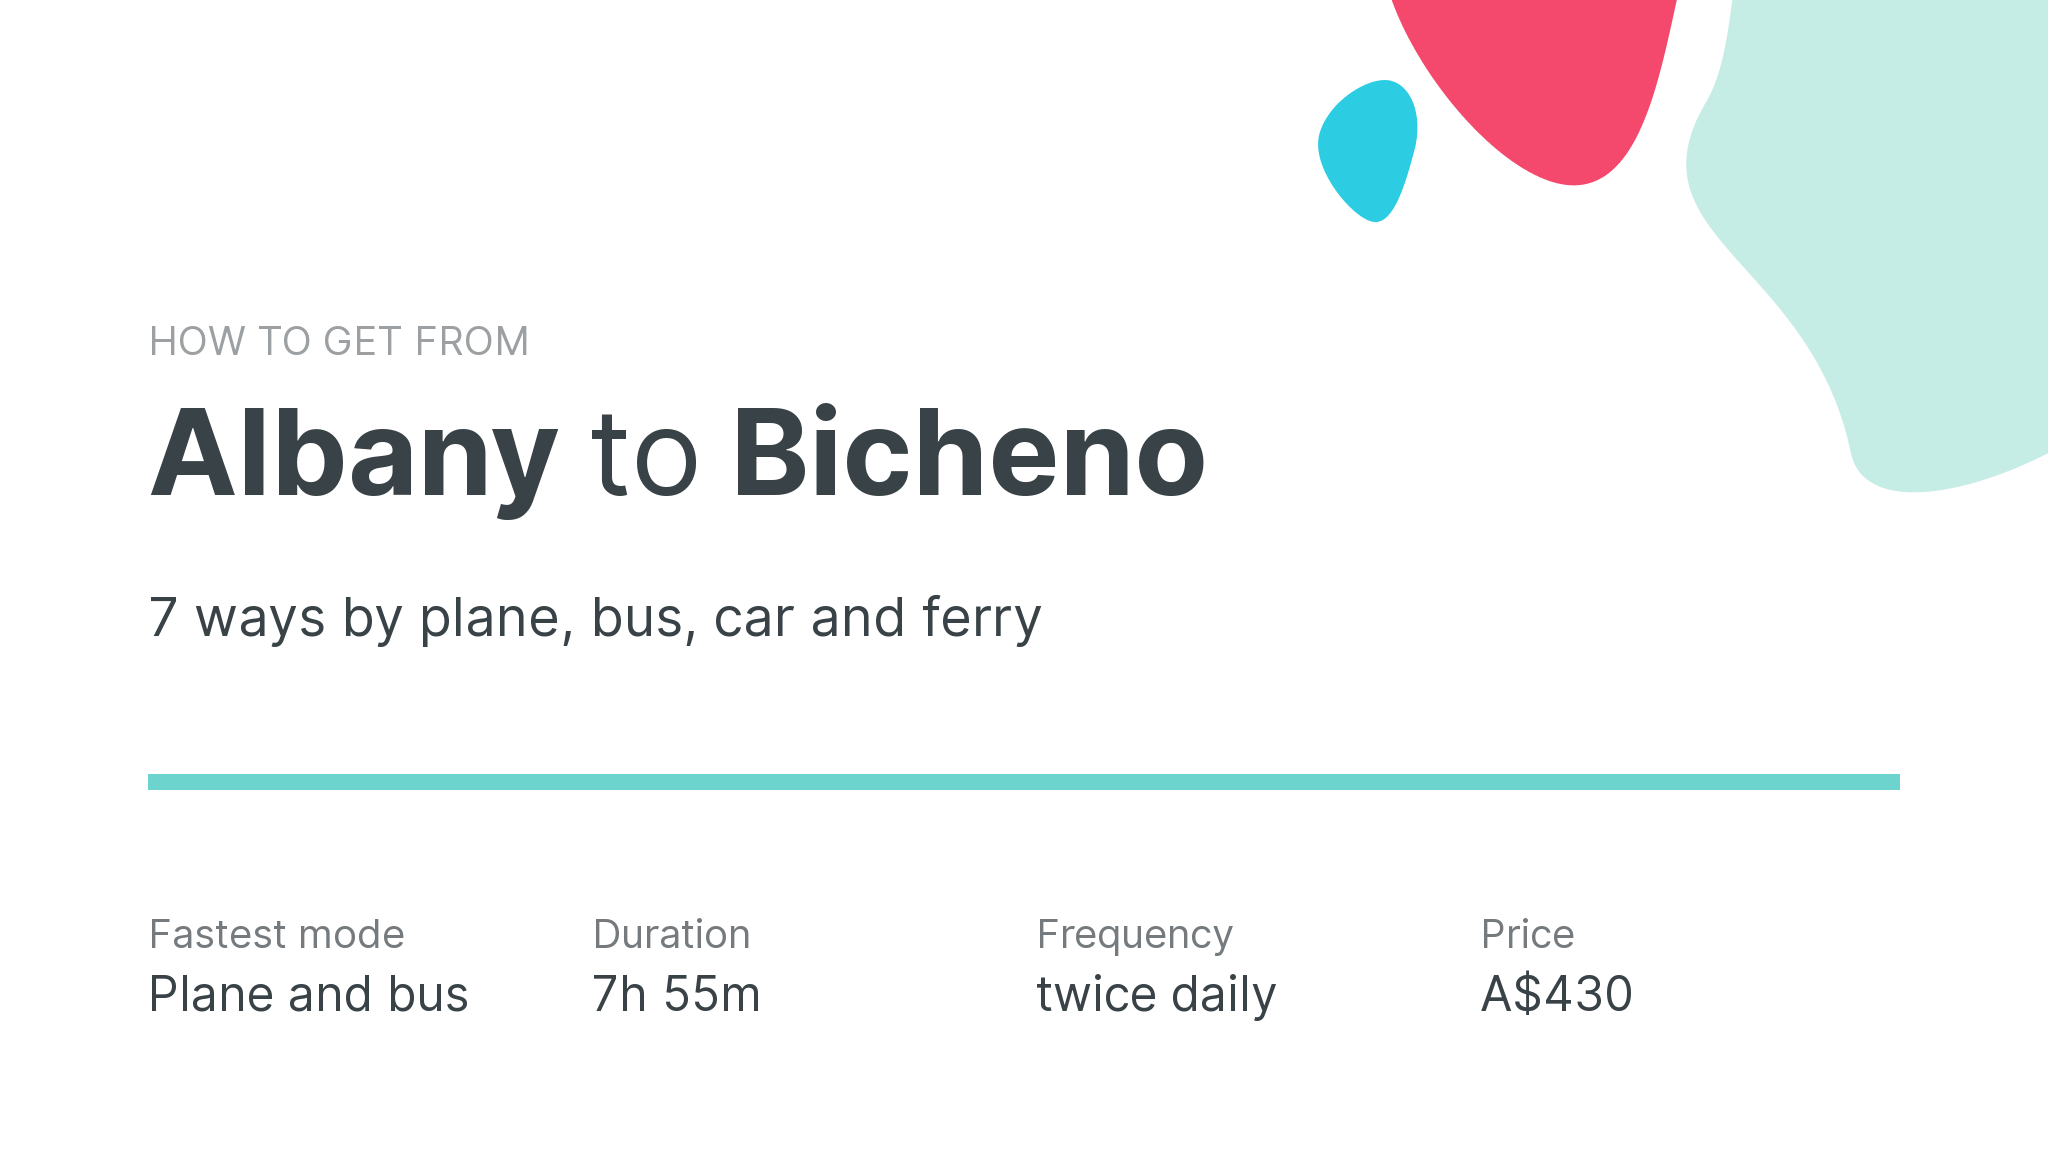 How do I get from Albany to Bicheno